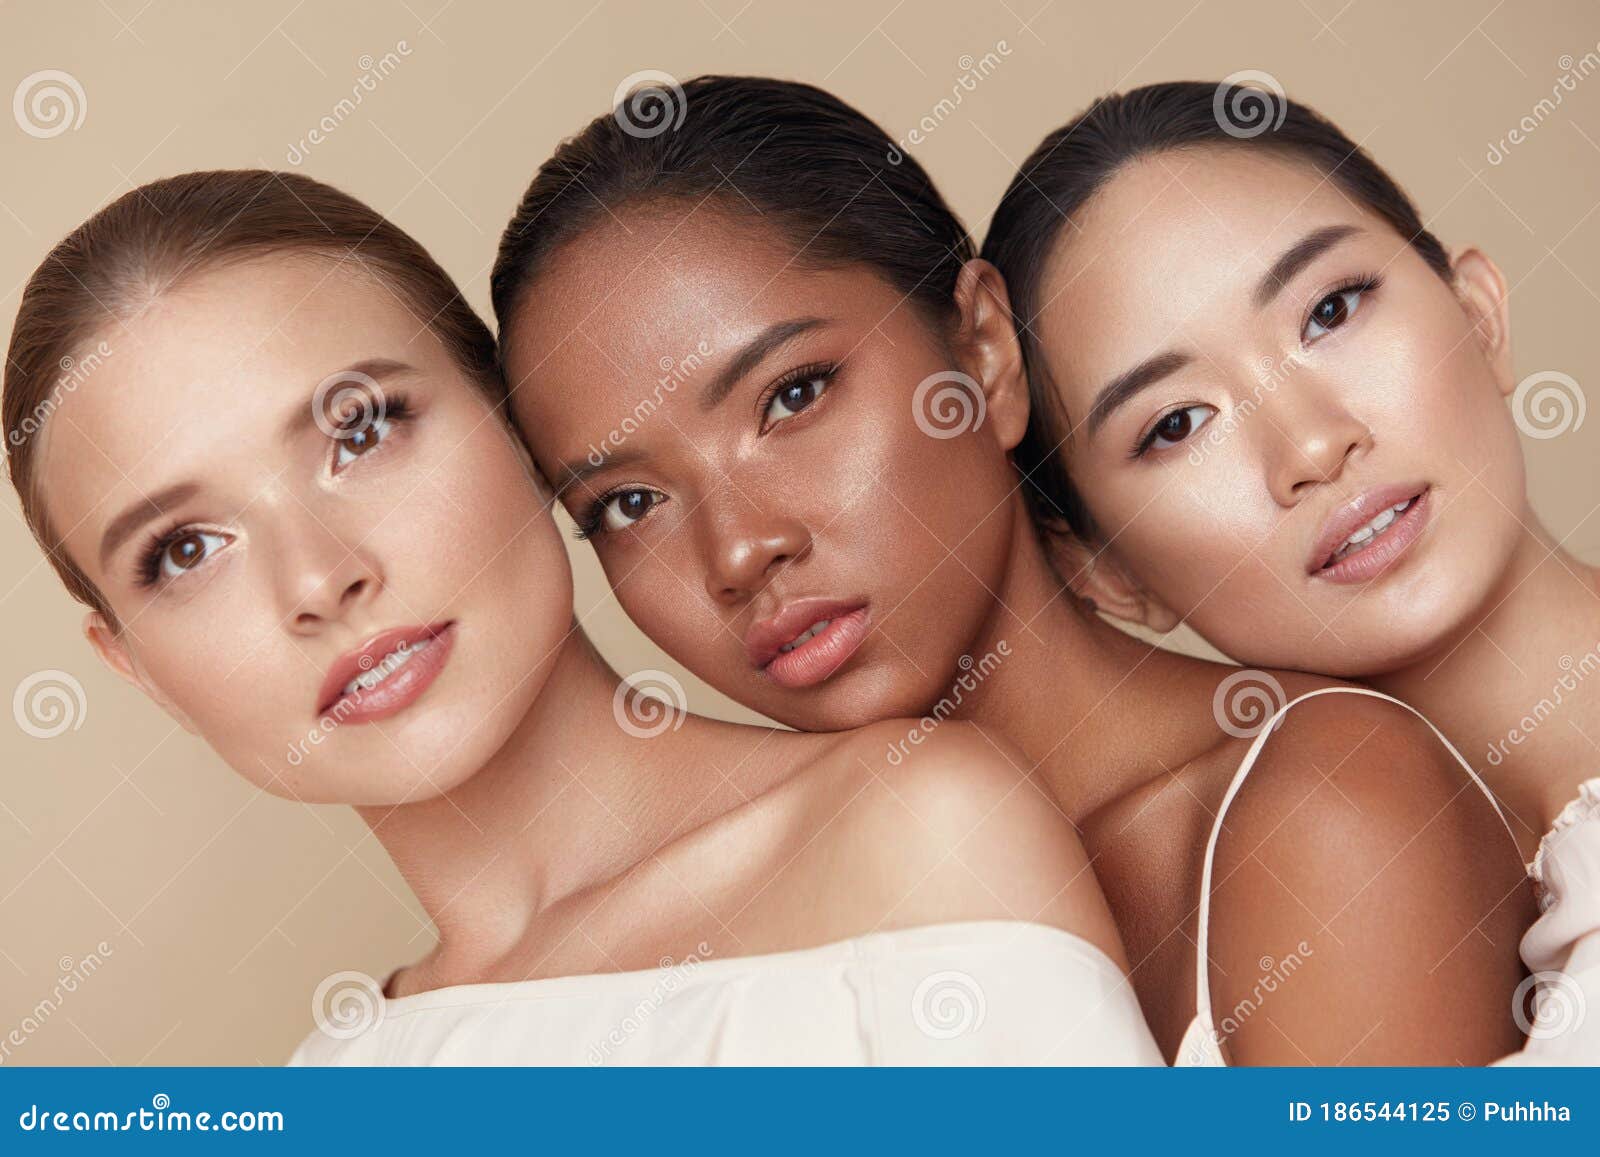 diversity. beauty portrait of different ethnicity women. multi-ethnic models standing together against beige background.